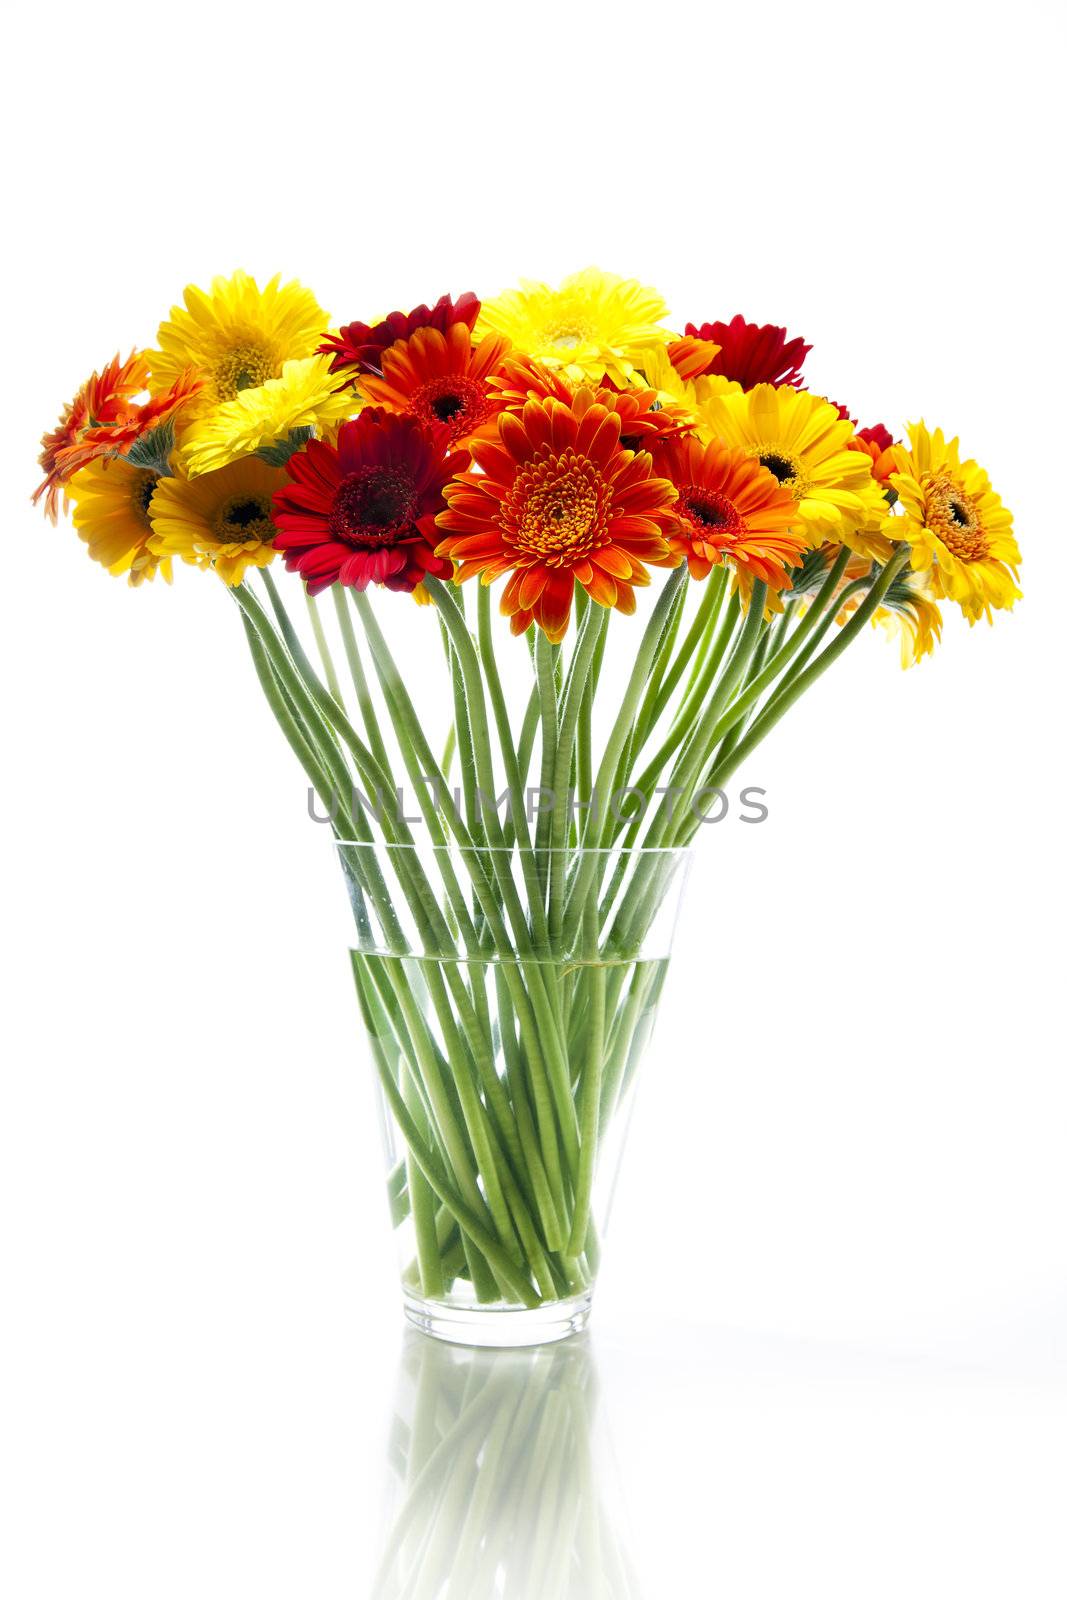 Vibrant daisies in glass vase on white background